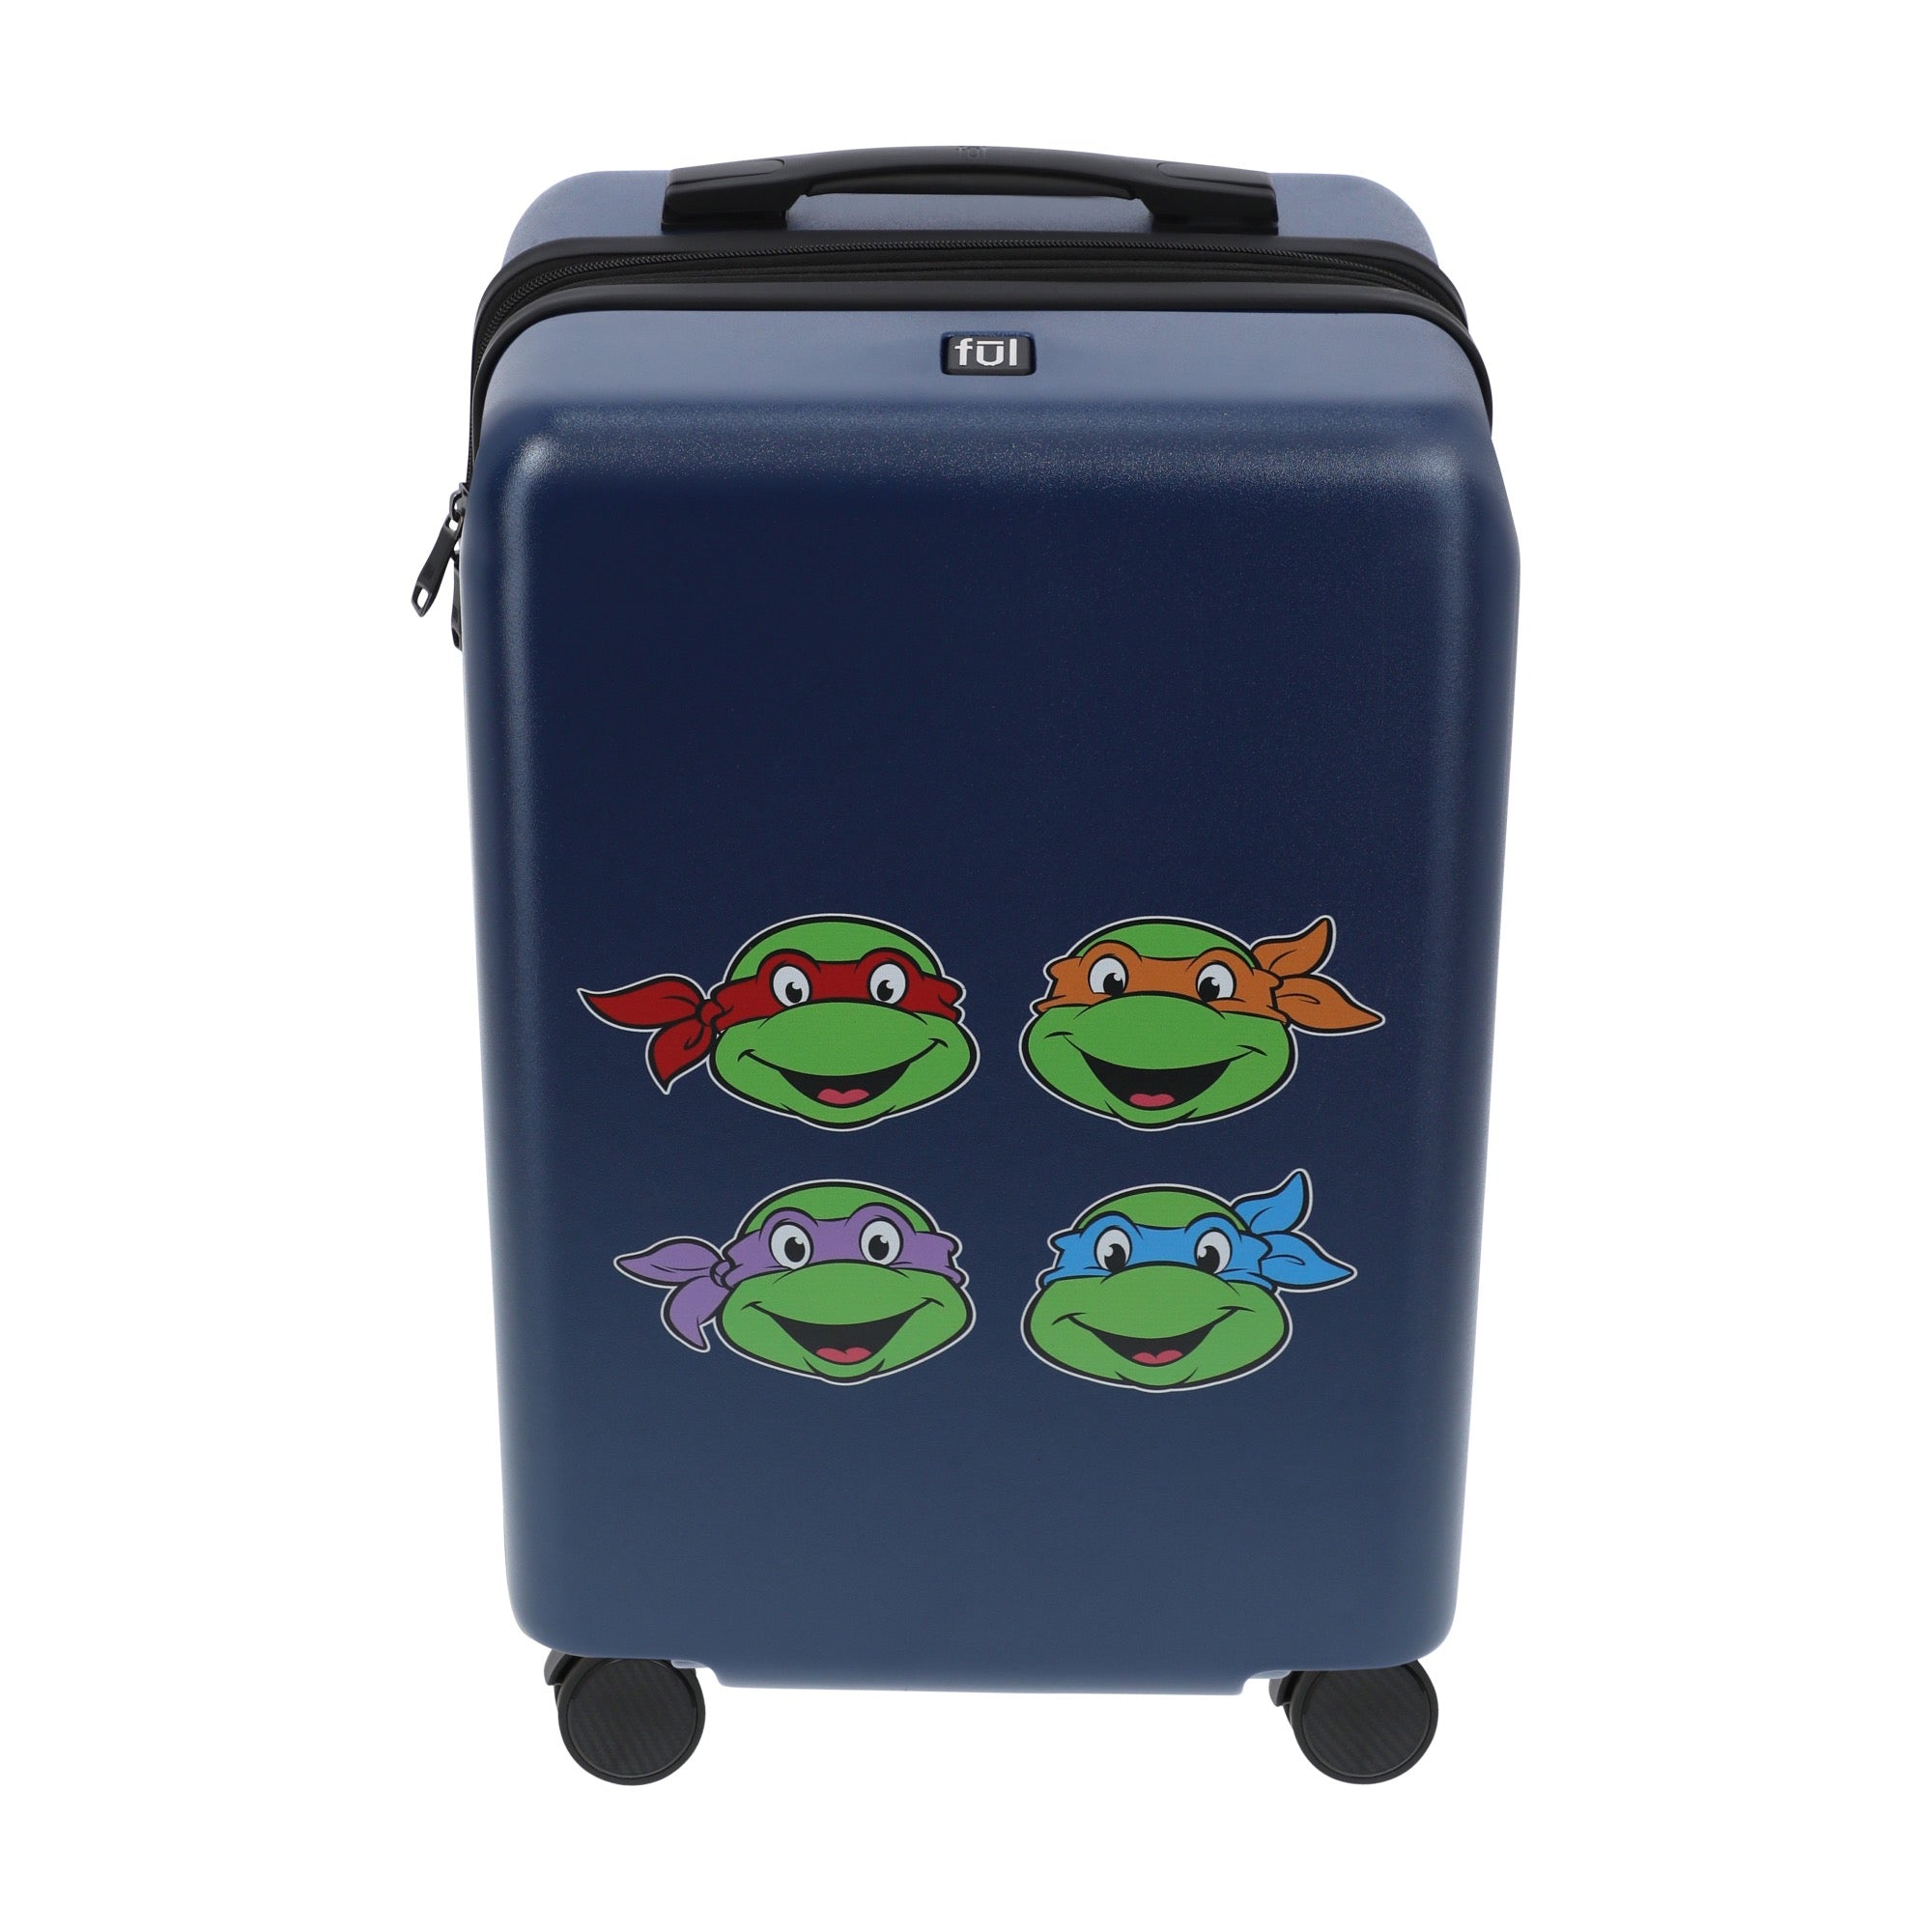 Navy blue paramount TMNT 22.5" carry-on spinner suitcase luggage by Ful